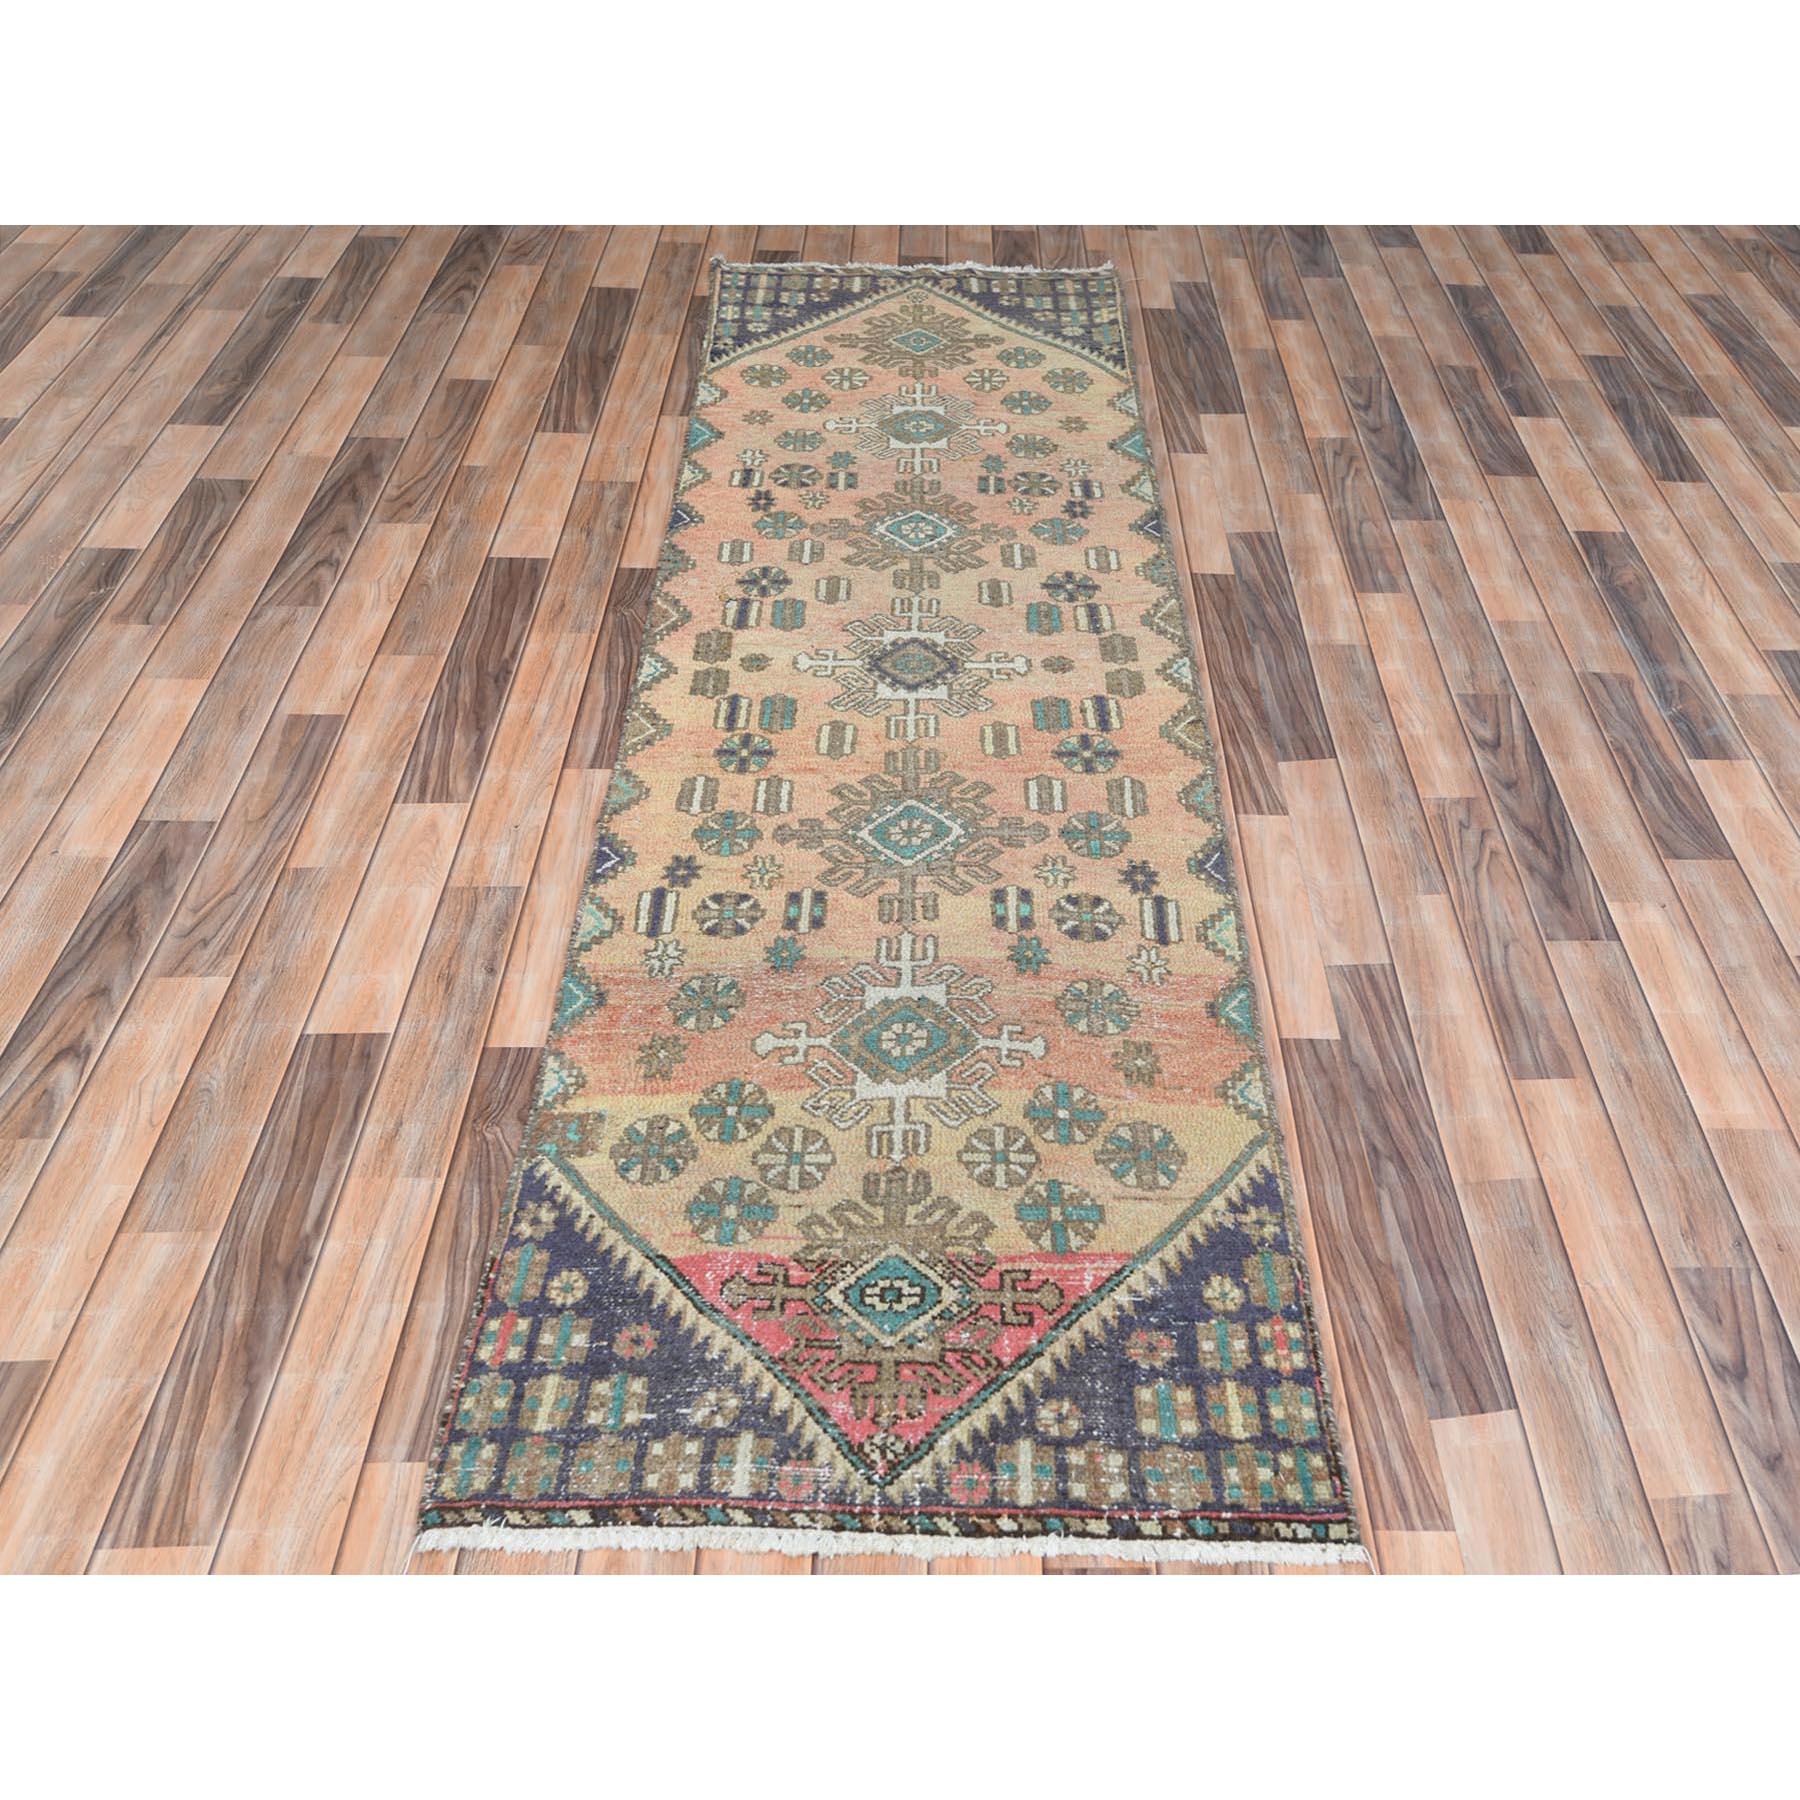 This fabulous hand-knotted carpet has been created and designed for extra strength and durability. This rug has been handcrafted for weeks in the traditional method that is used to make
Exact Rug Size in Feet and Inches : 2'7